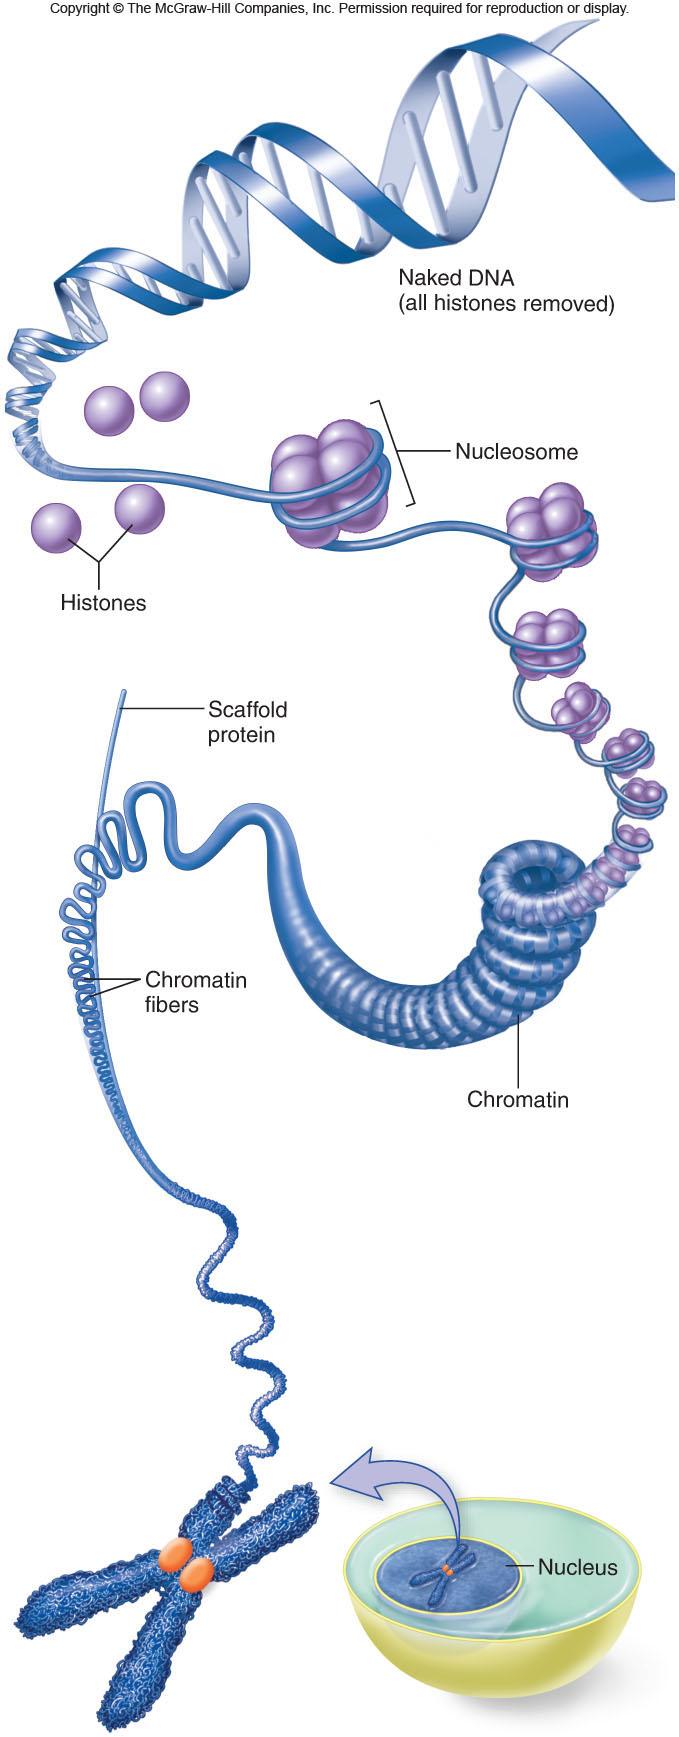 What s a nucleosome?